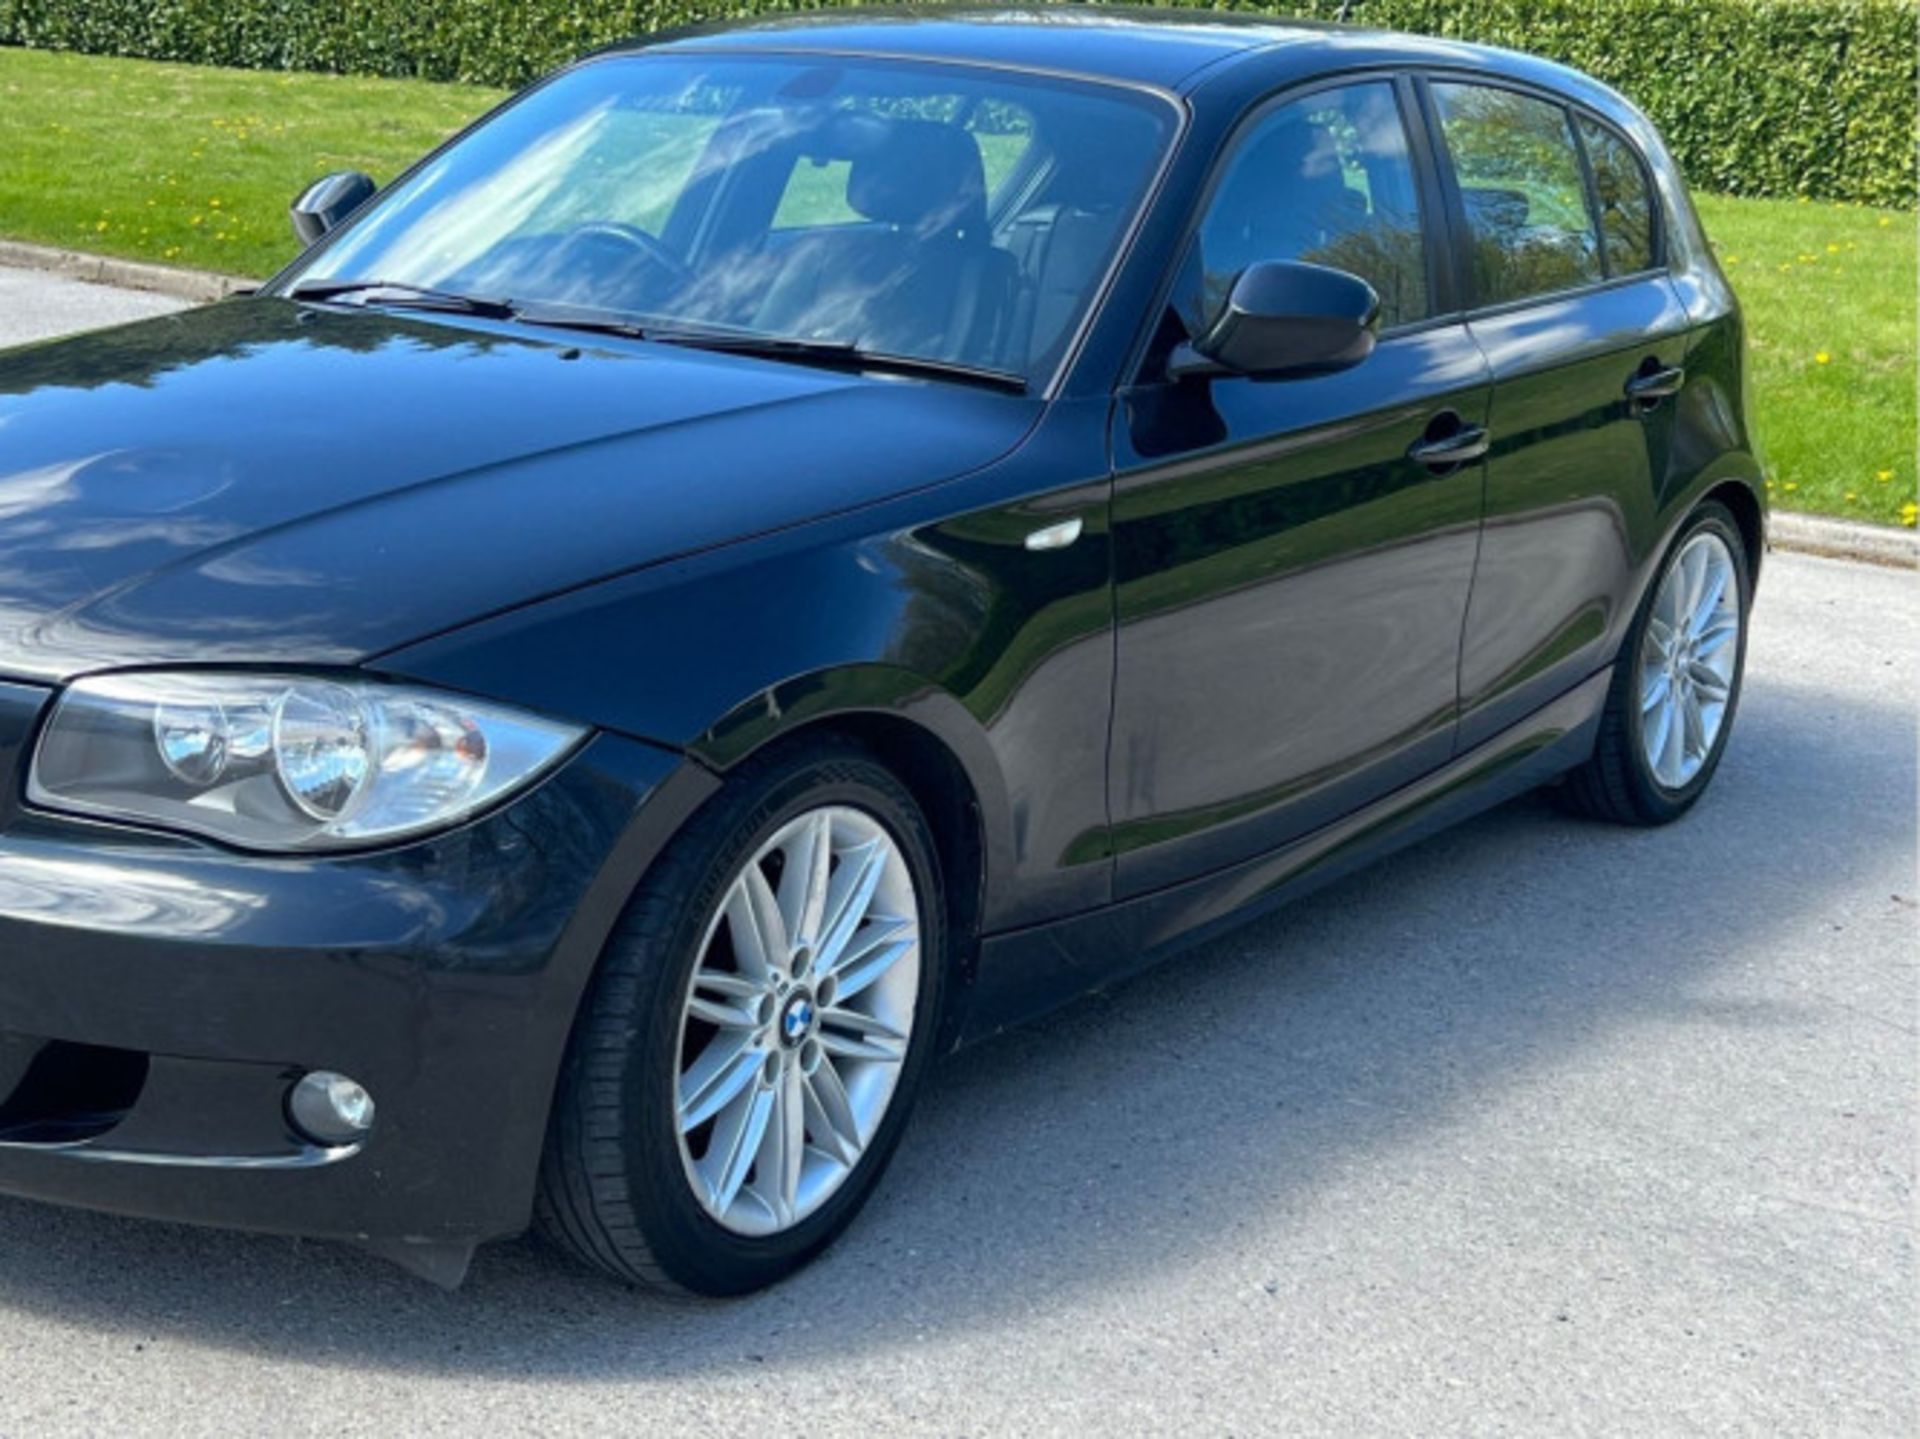 BMW 1 SERIES 2.0 118D M SPORT EURO 5 5DR (2010) - Image 58 of 58